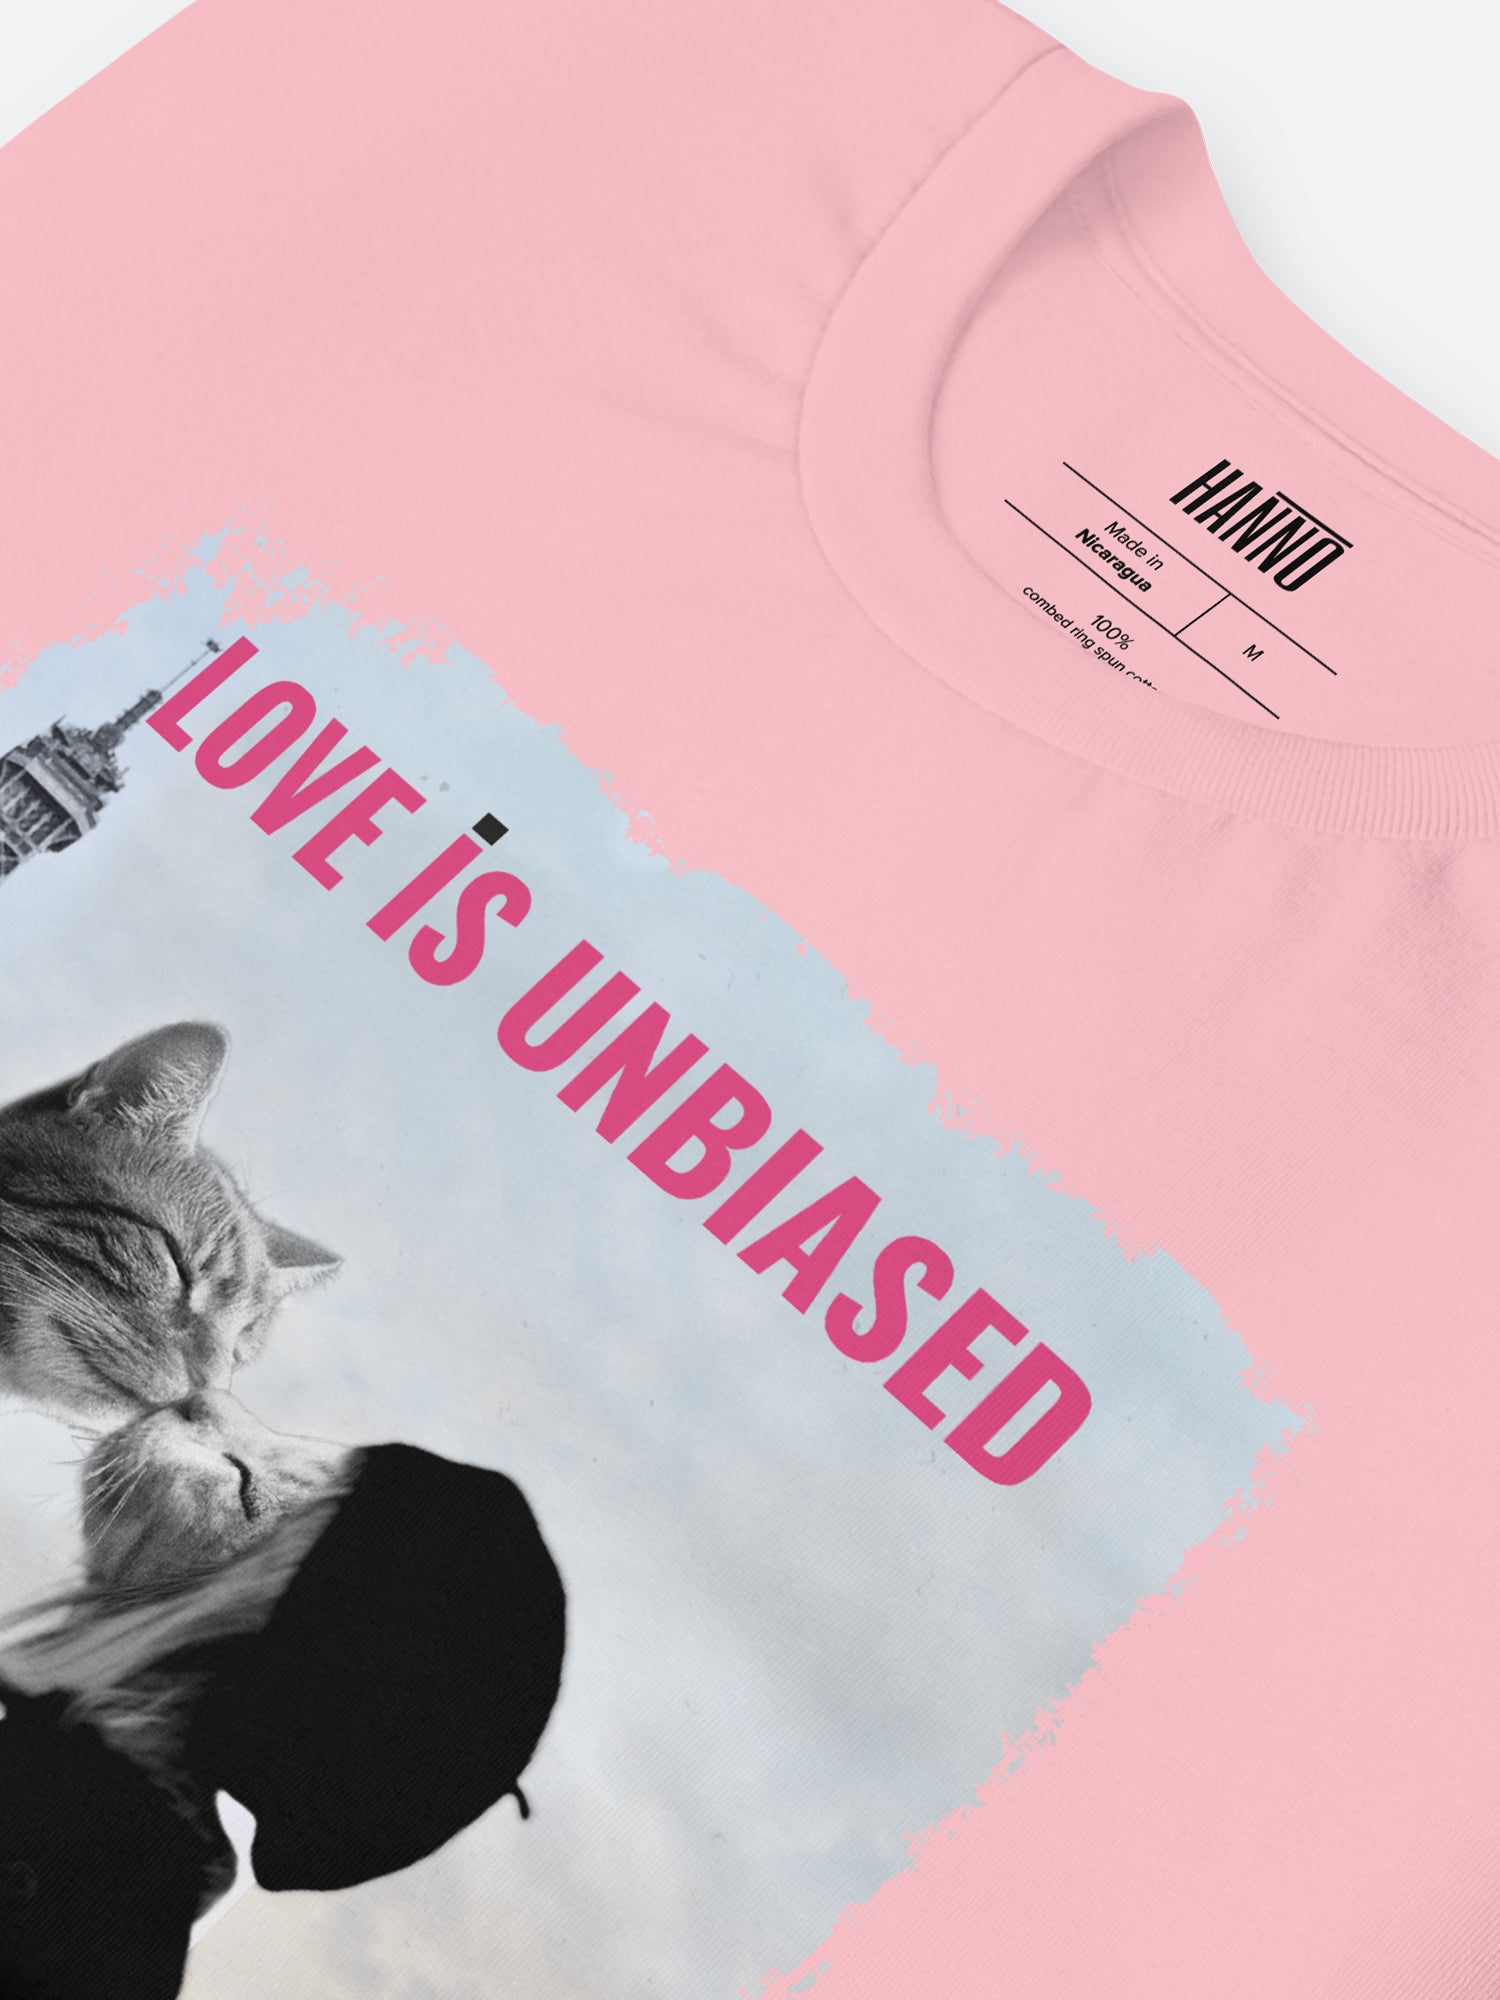 FRENCH KISS CAT LOVERS T SHIRT "LOVE IS UNBIASED"